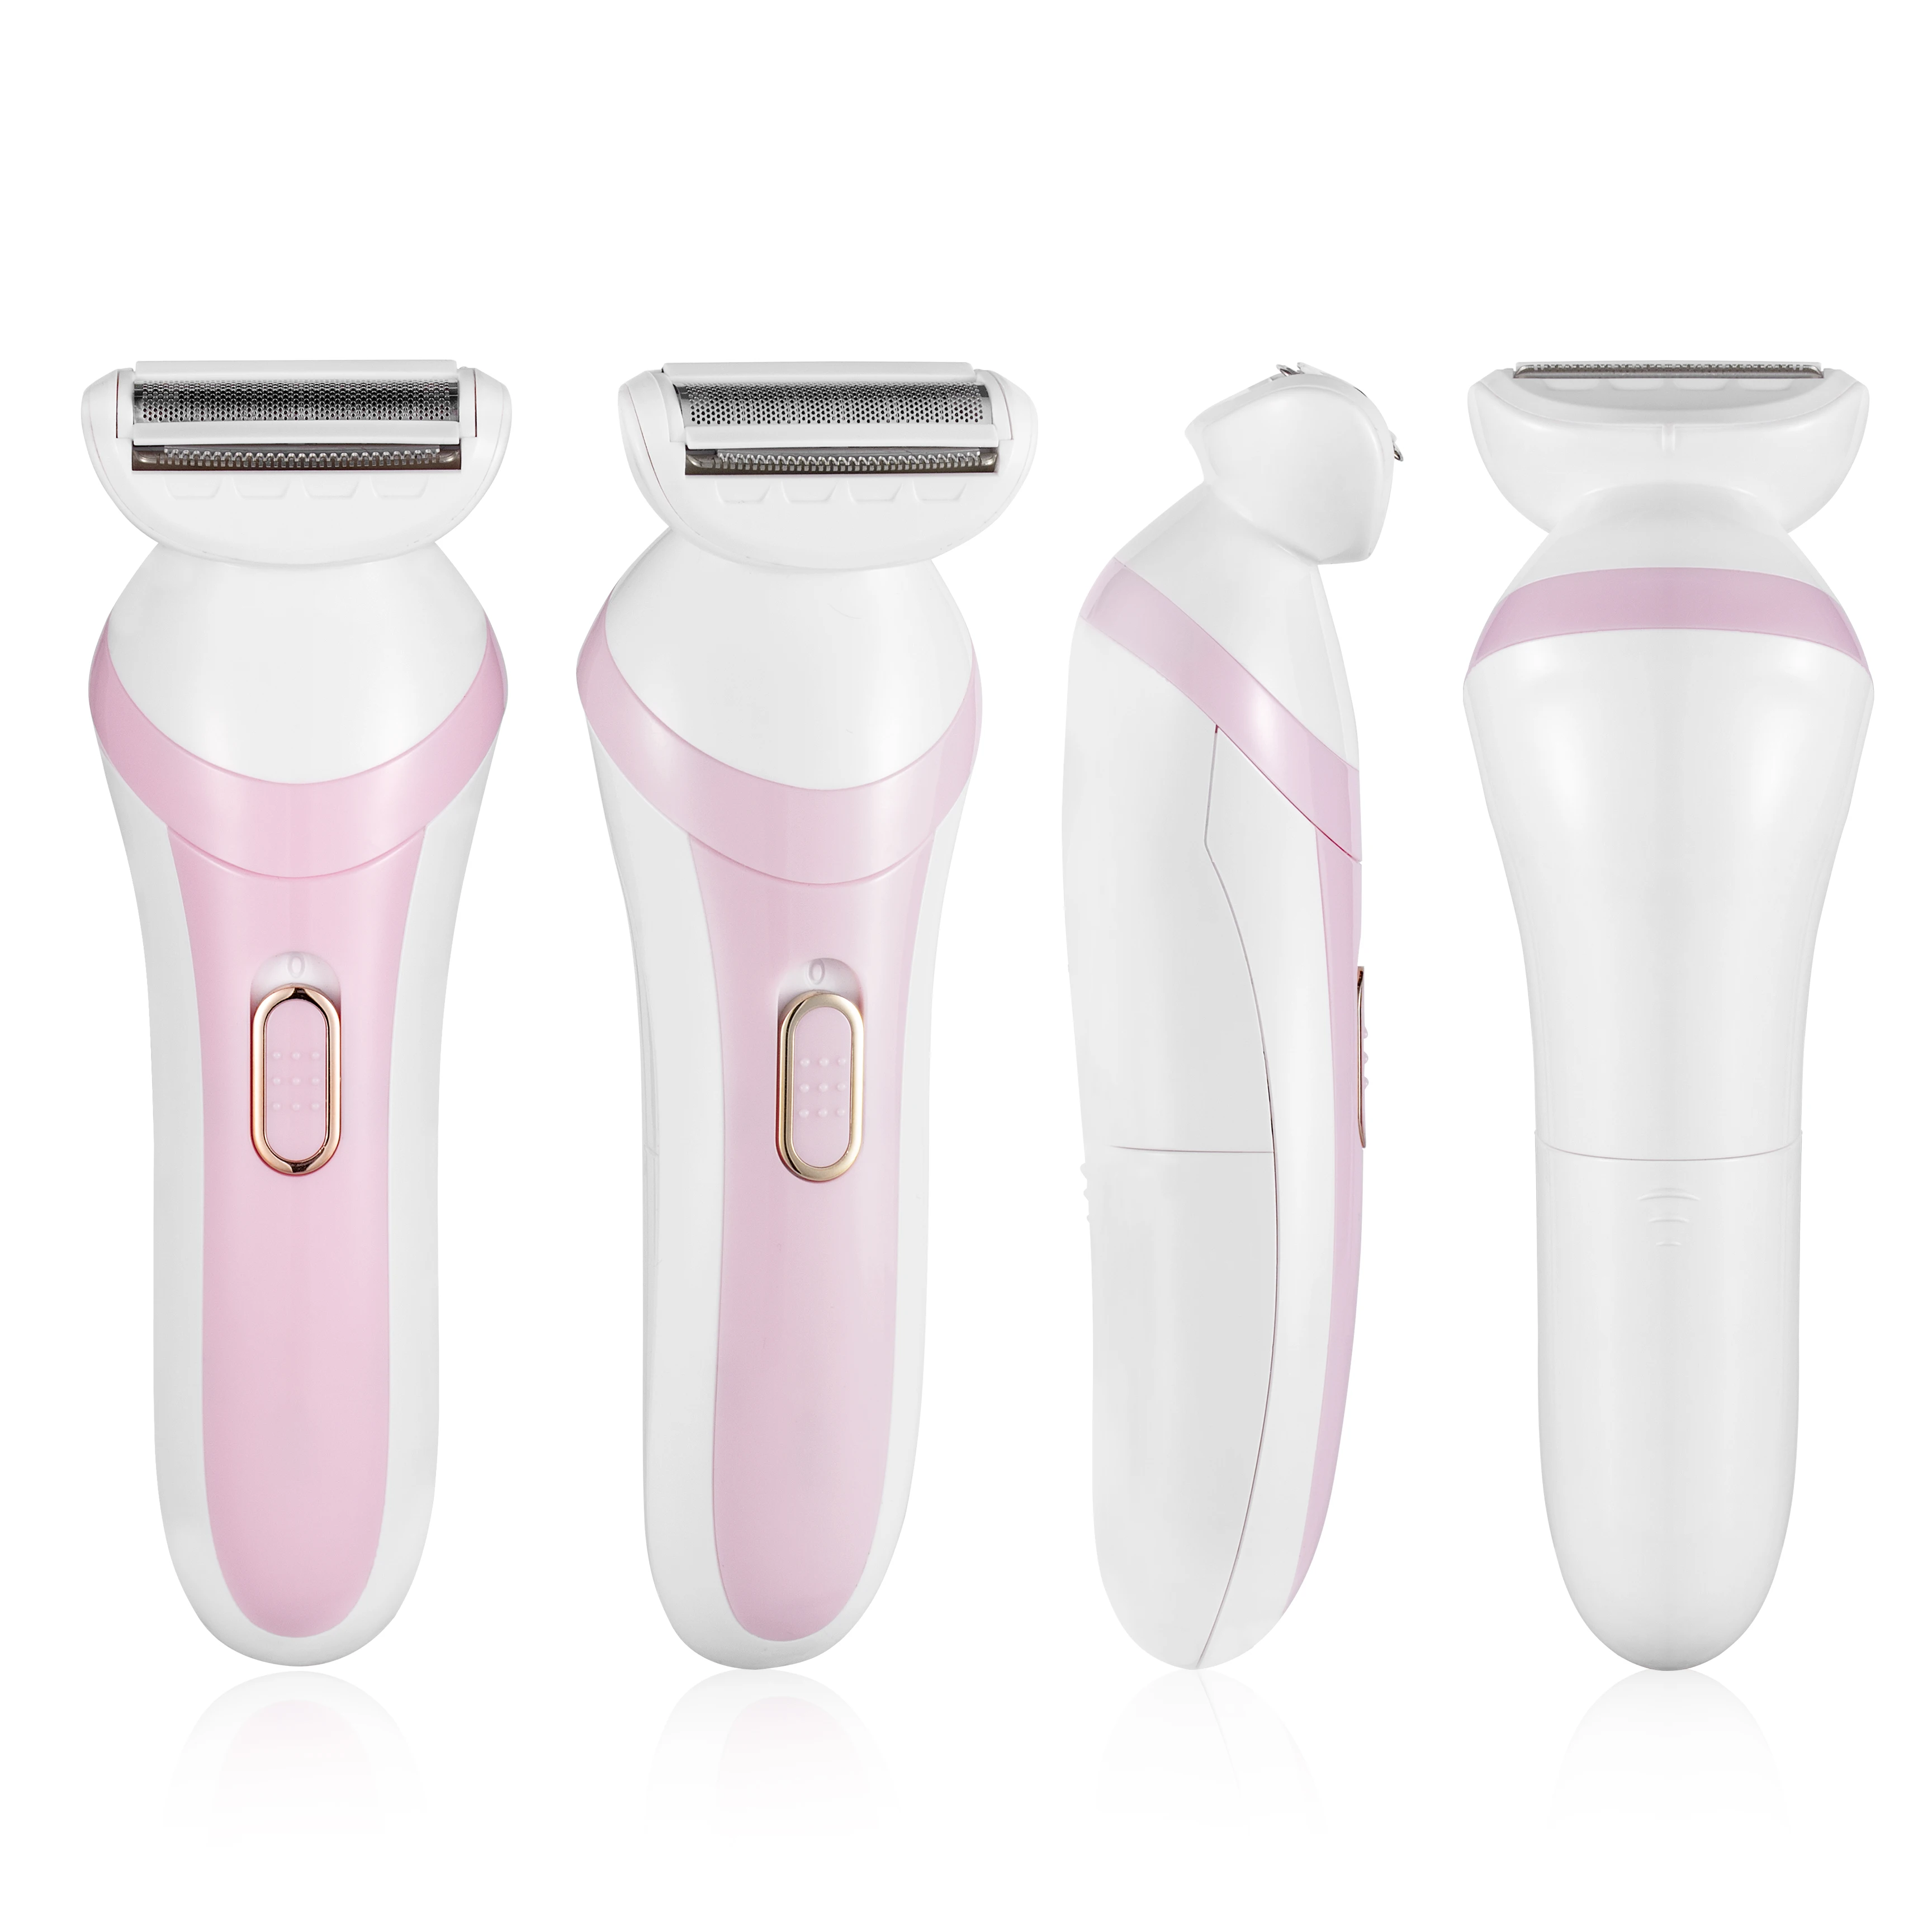 iDOLESHOP Lady Shaver and Bikini Trimmer Rechargeable 3IN1 Electric  Shaver for Women Lady Epilator Body Hair Trimmer Cordless Trimmer 60 min  Runtime 1 Length Settings Price in India  Buy iDOLESHOP Lady